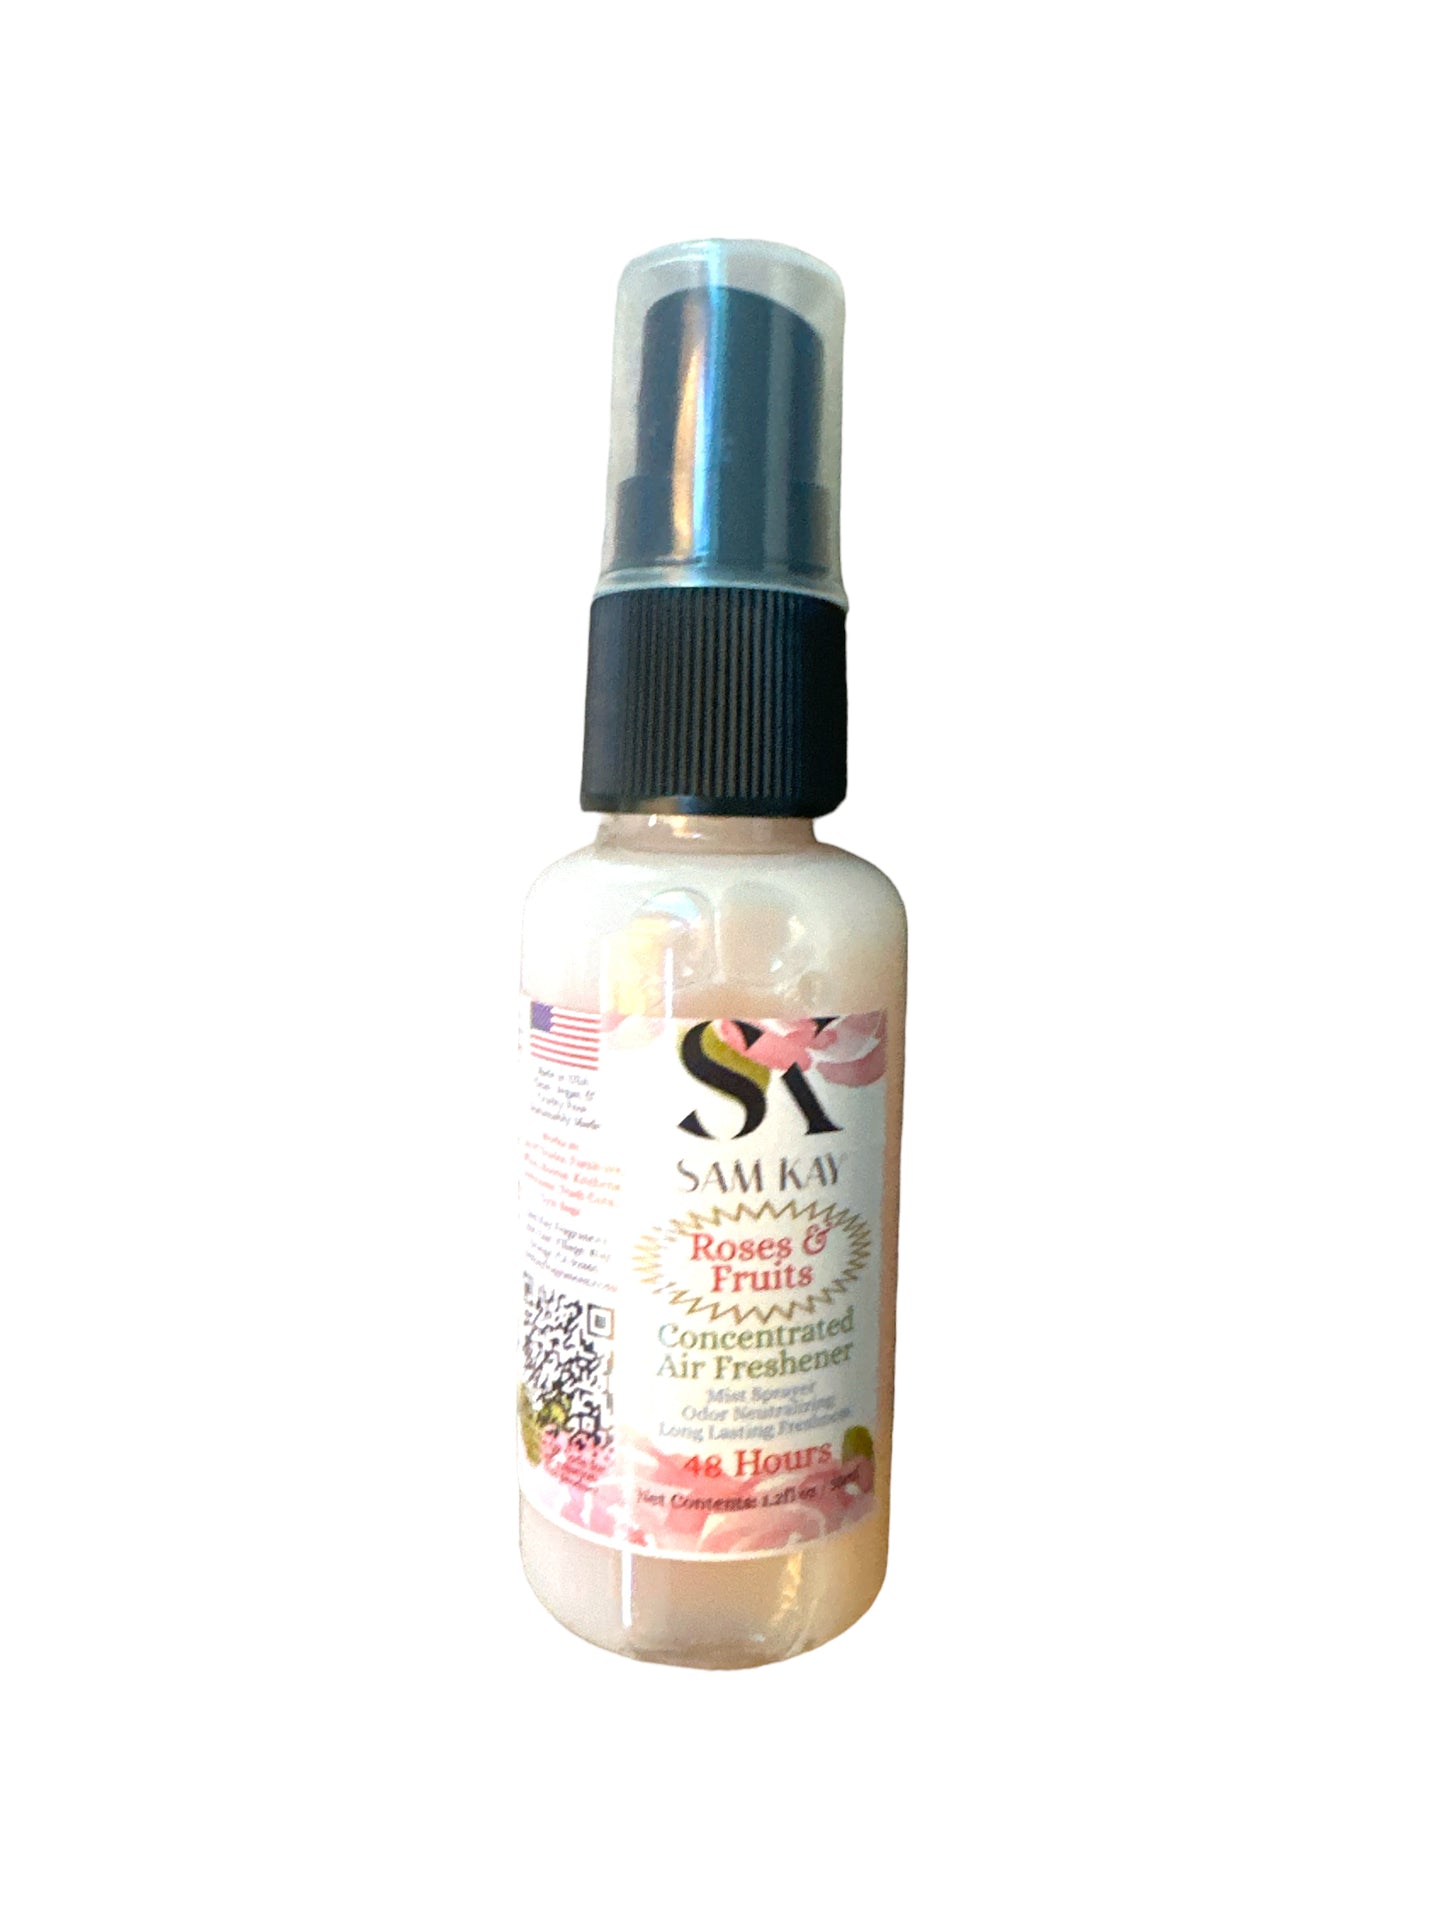 Roses & Fruits - Concentrated Air Freshener Mist Sprayer Odor Neutralizing Lasts 48 Hours - Made in USA